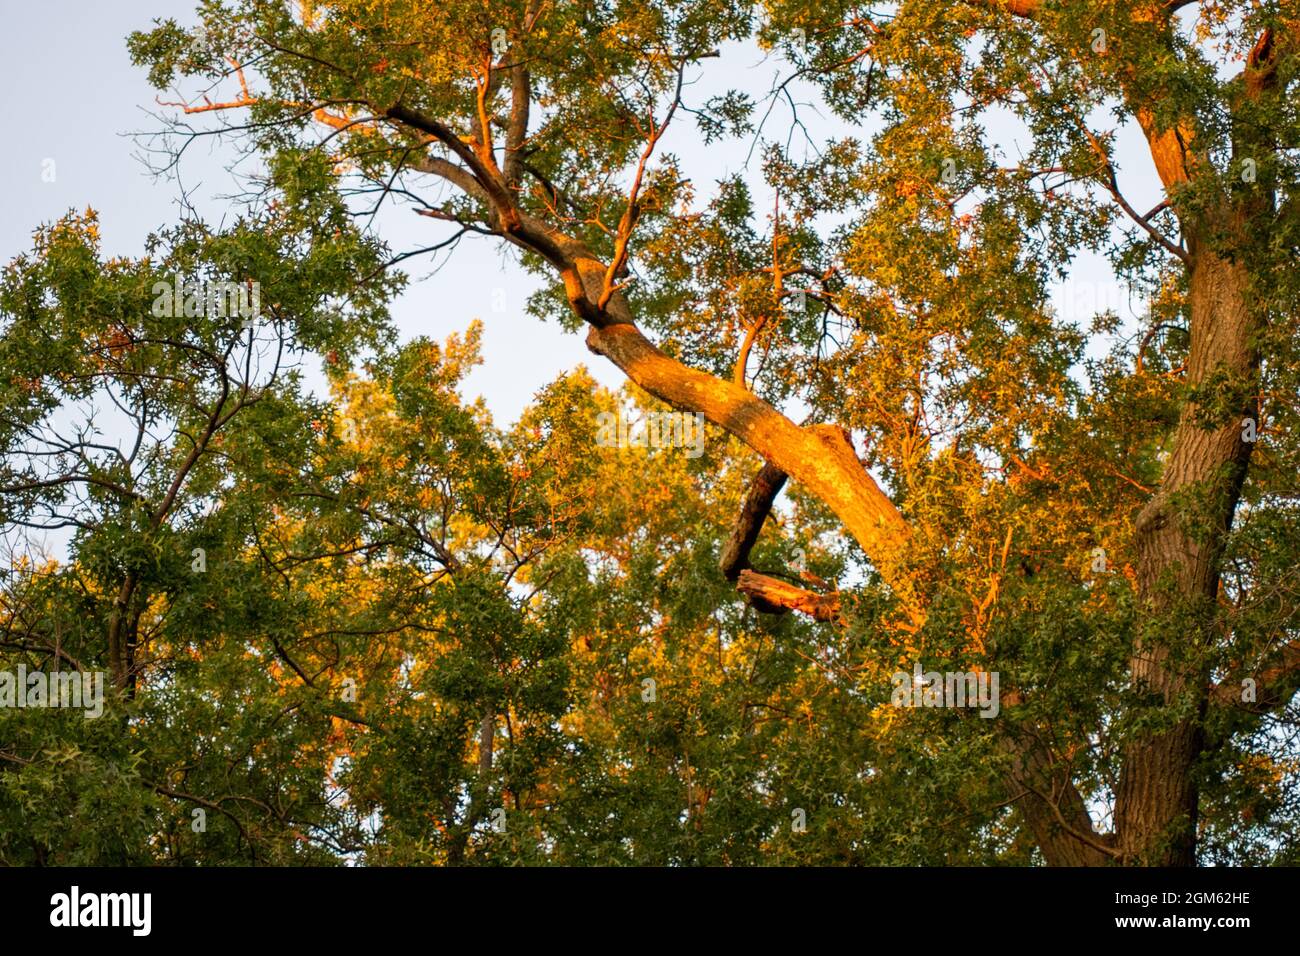 The Top of a Tree at Sunset At the Start of Autumn Stock Photo